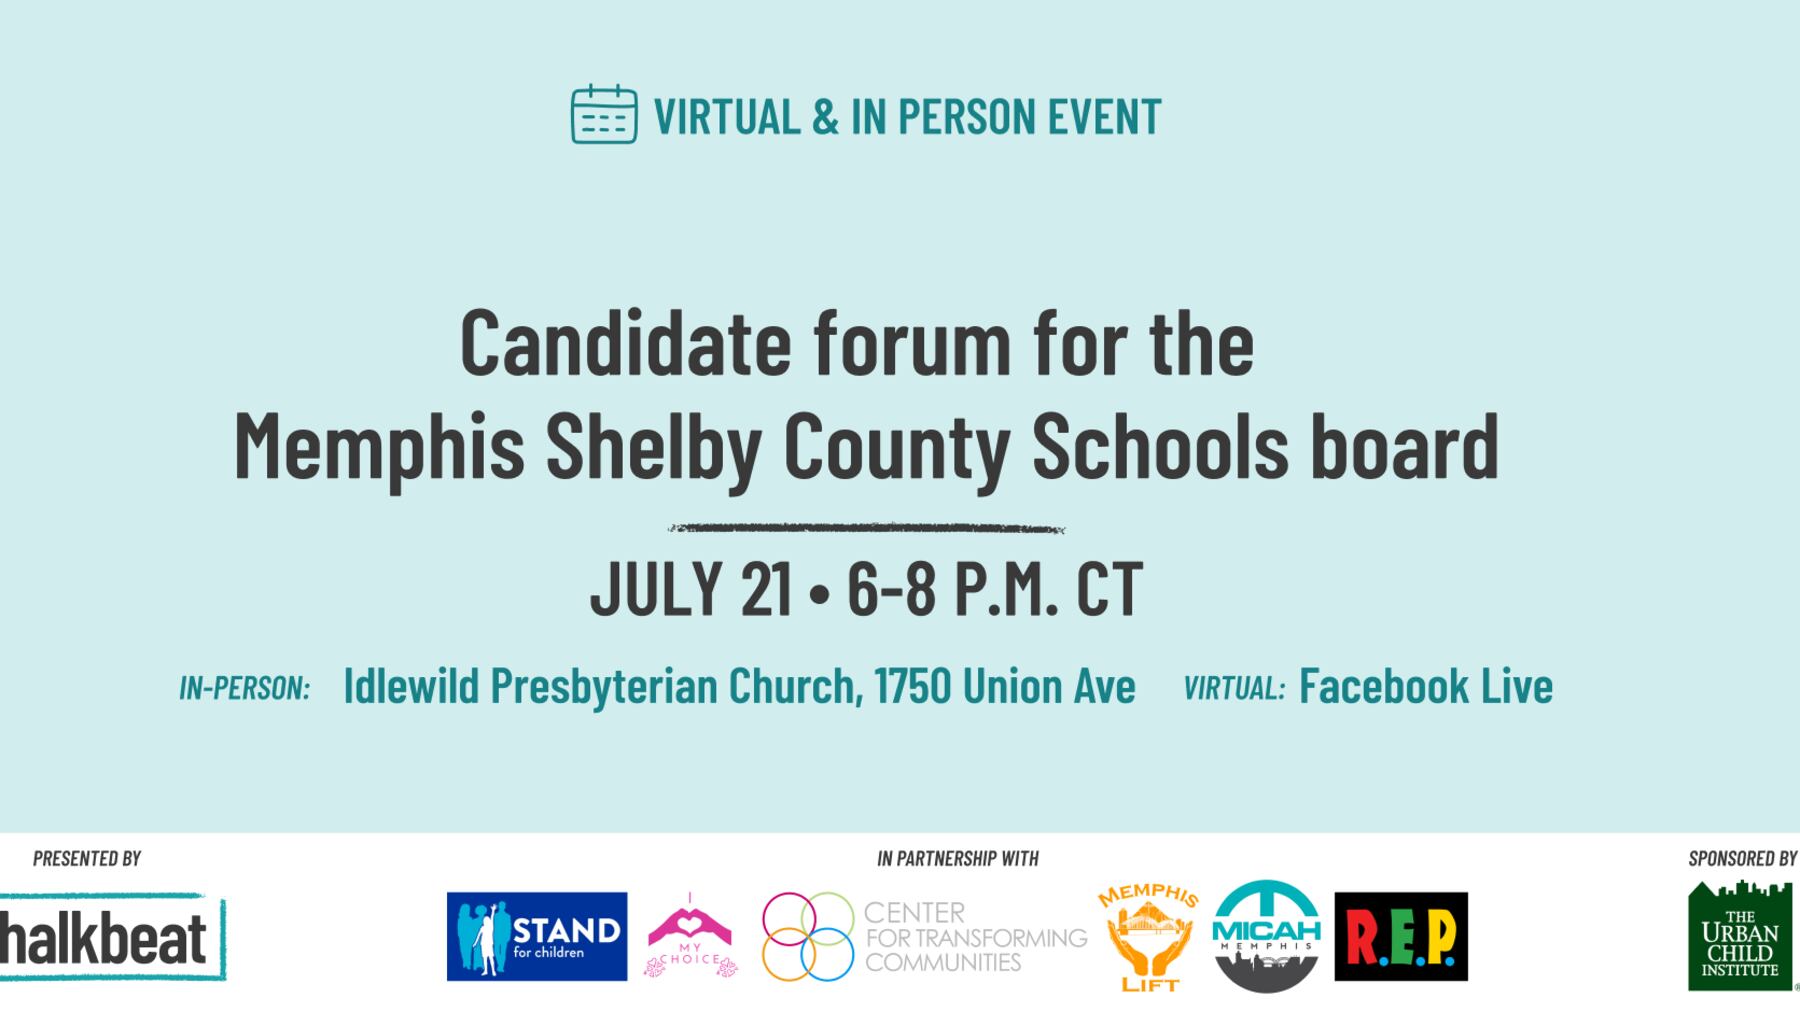 Promotional image of event with title “Forum: Who is running for the Memphis Shelby County Schools board?” against a blue backdrop.